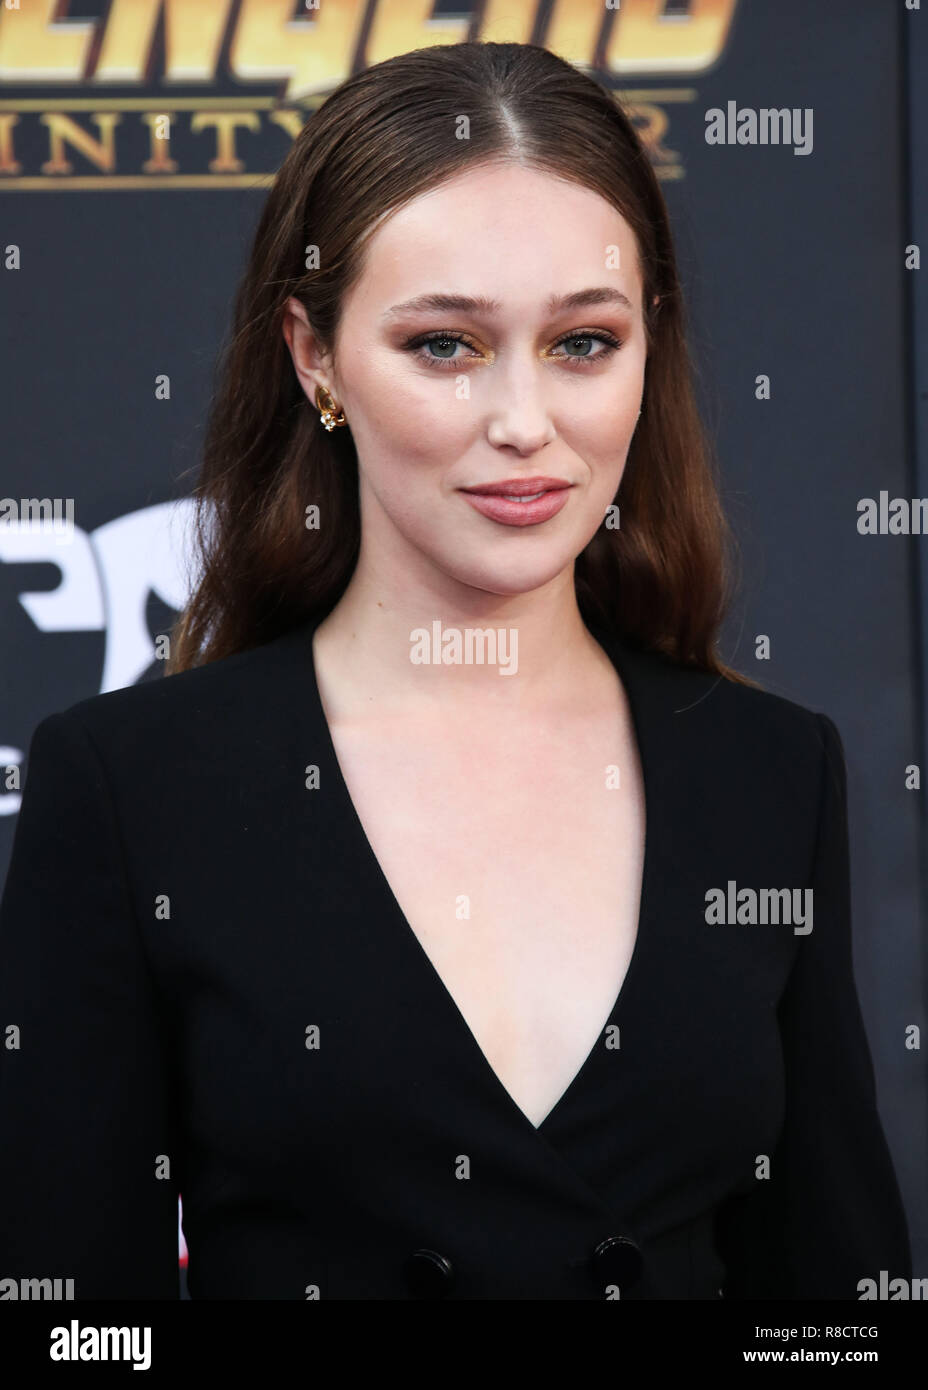 HOLLYWOOD, LOS ANGELES, CA, USA - APRIL 23: Alycia Debnam Carey at the World Premiere Of Disney And Marvel's 'Avengers: Infinity War' held at the El Capitan Theatre, Dolby Theatre and TCL Chinese Theatre IMAX on April 23, 2018 in Hollywood, Los Angeles, California, United States. (Photo by Xavier Collin/Image Press Agency) Stock Photo